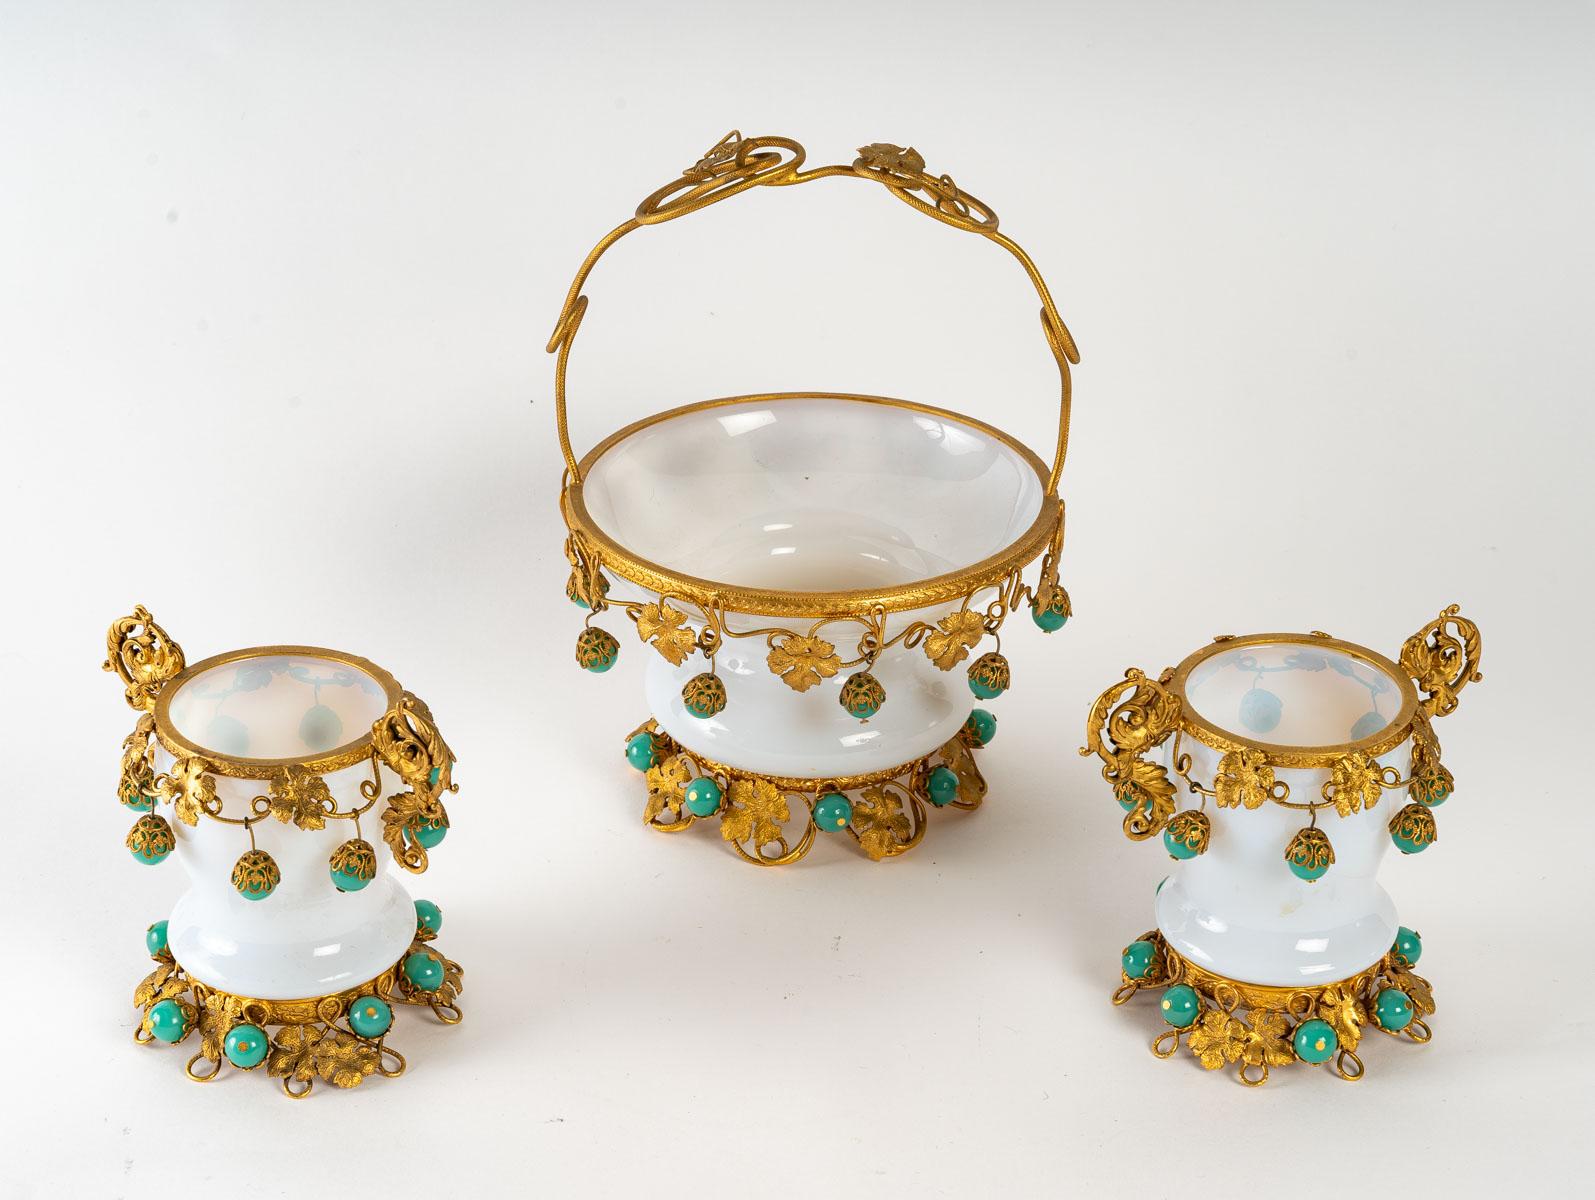 Basket and its Two Soapy White Opaline Goblets, Charles X period, gilt brass mounting and green opaline ball decoration set with gilt brass, 19th century, 1820 - 1840.
Basket - H: 21 cm, W: 16 cm, D: 15 cm
Goblet - H: 11.5 cm, W: 13 cm, D: 8 cm.